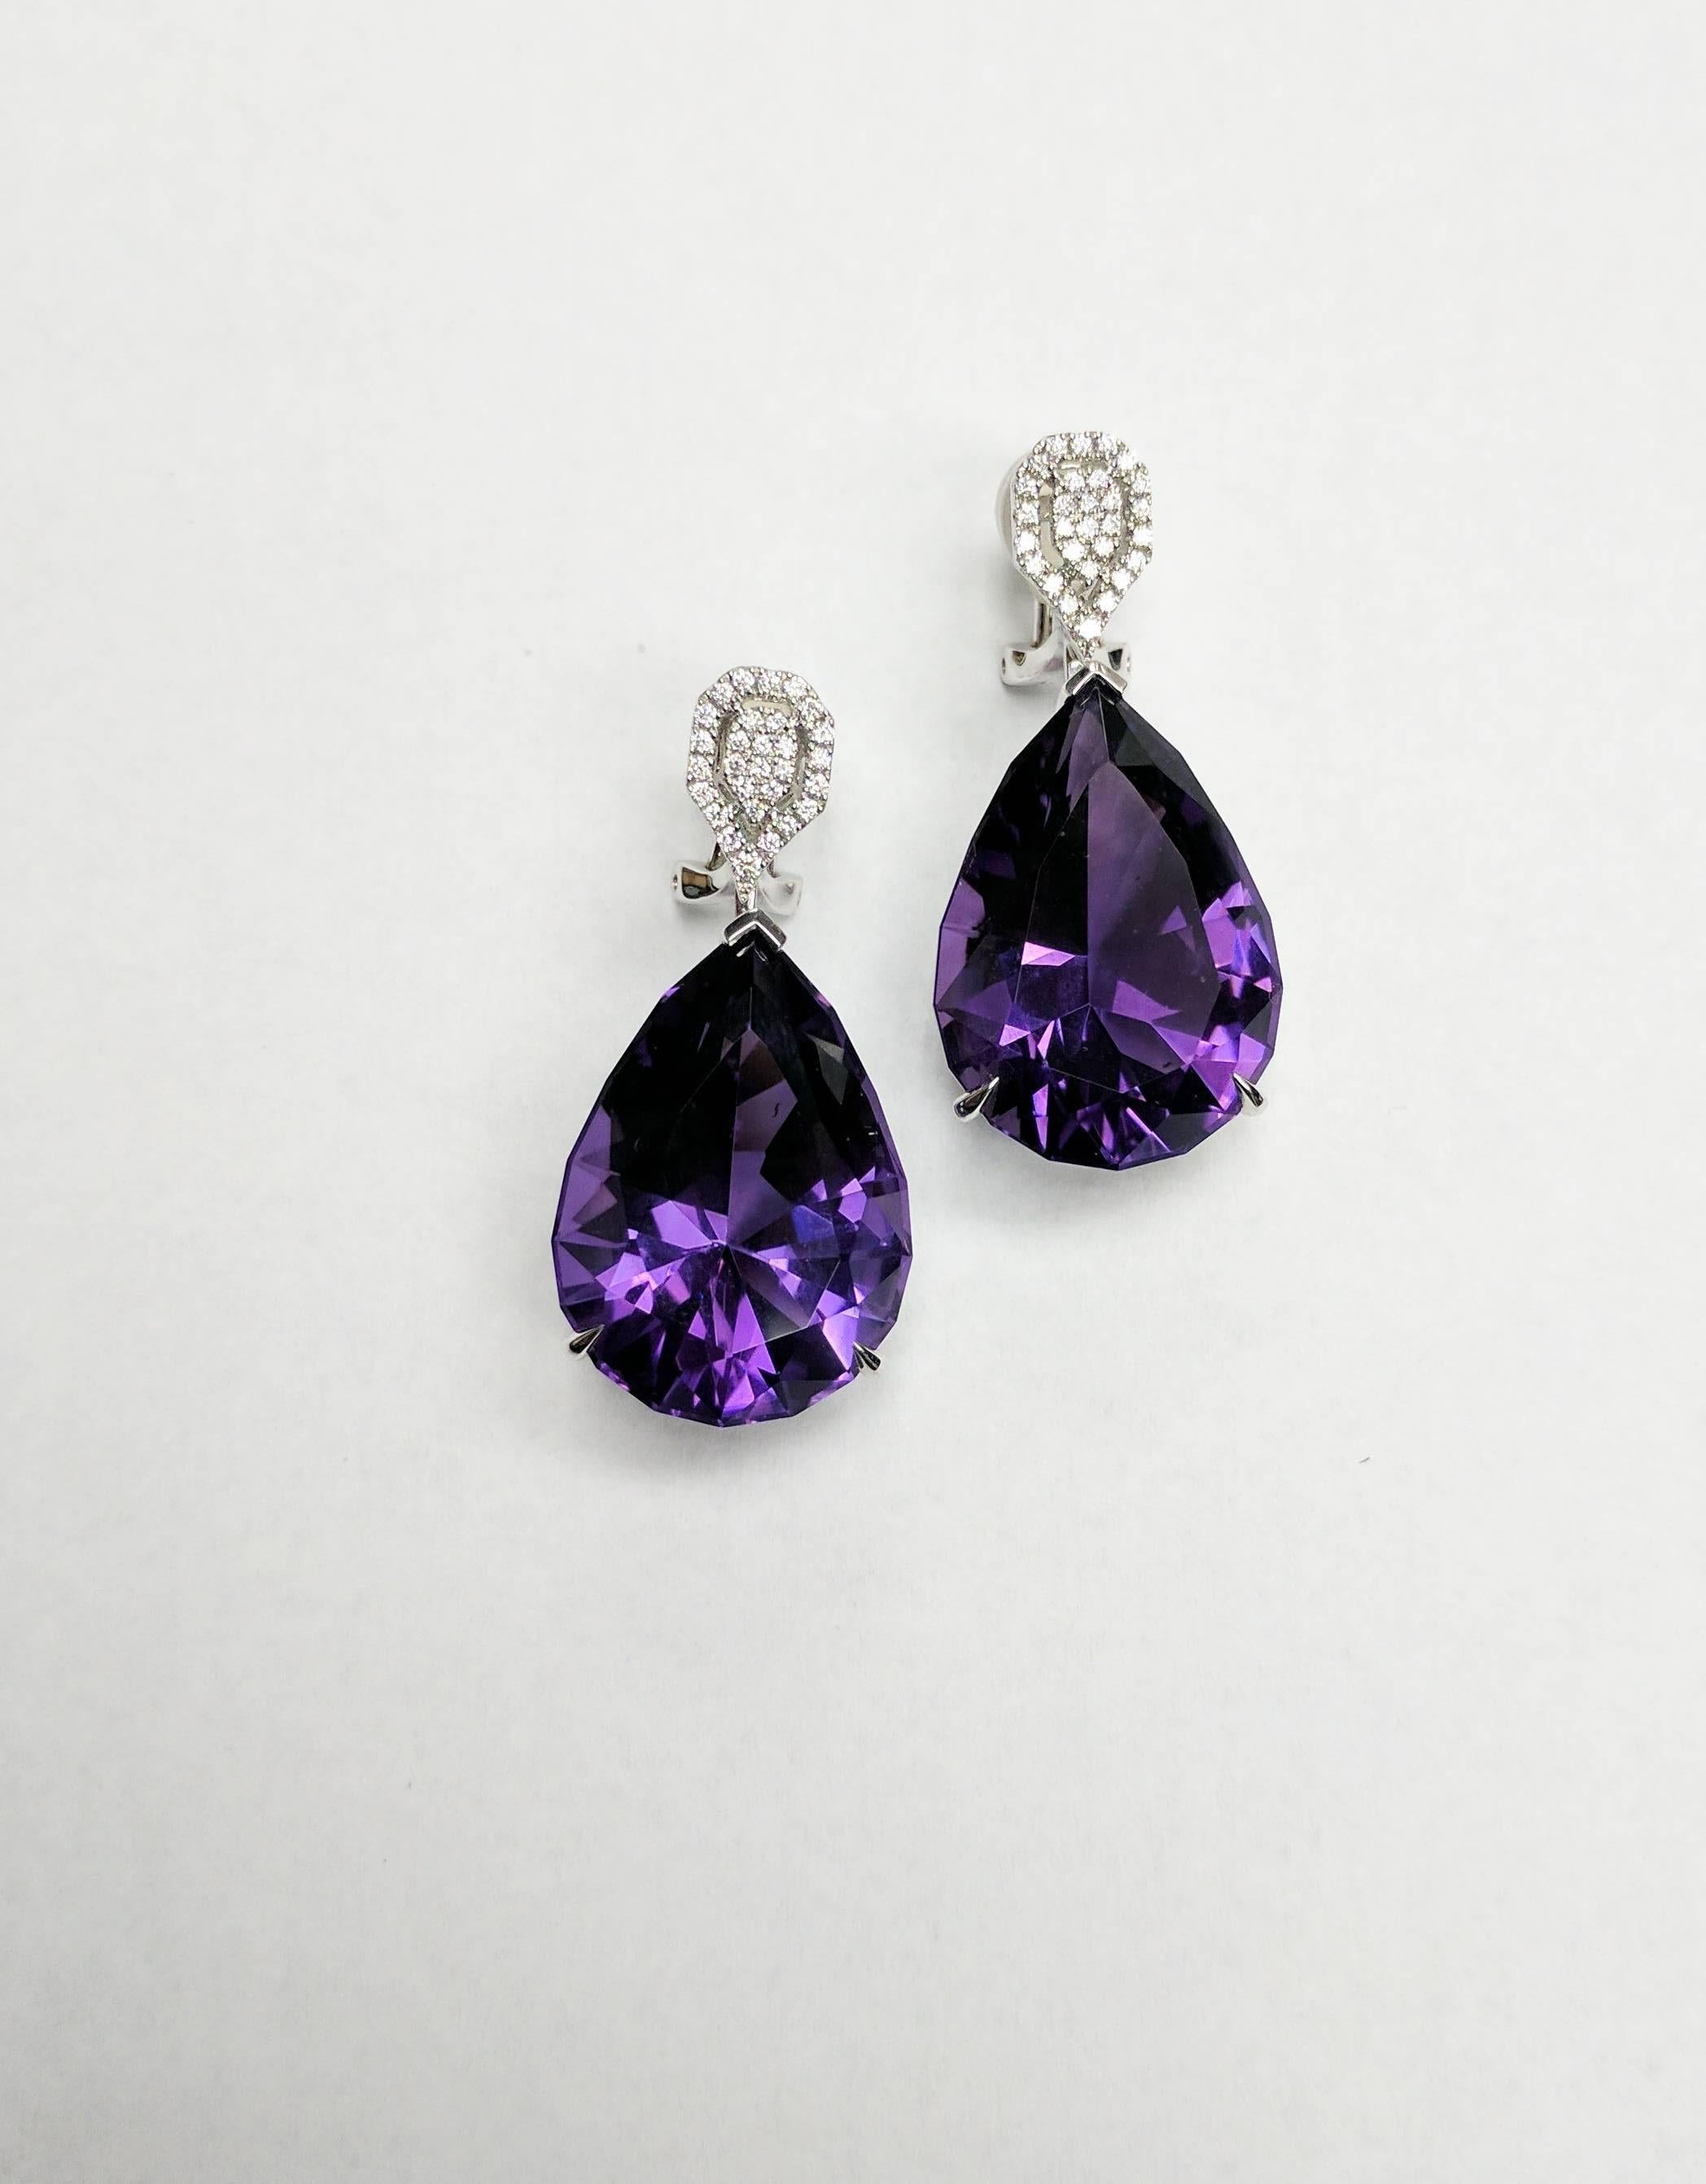 One-of-a-kind Frederic Sage pear-shaped Amethyst earrings with omega microset diamond cluster clip top

Total Amethyst weight: 50.94 ct
Total diamond count: 58
Total diamond weight: 0.35 ct